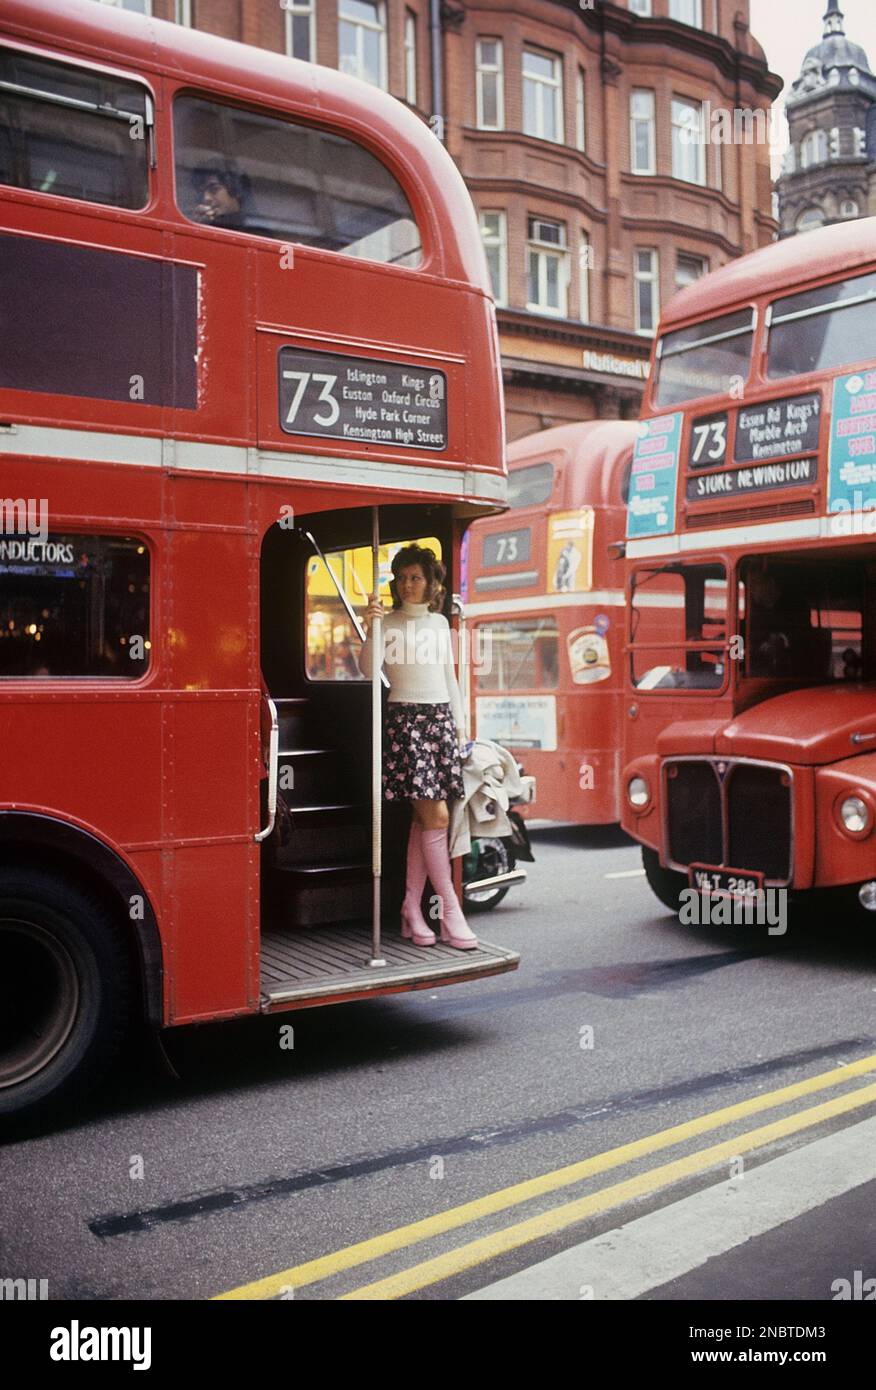 London 1972. A street view of Oxford street with the typical red double decked buses. A young woman is seen on the platform ready to go off. She is dressed in a typical 1970s outfit, jumper, short pink patterned skirt and matching pink leather boots in a platform model. A shoe fashion that at this time was popular in Europe and Britain and continued to be so until 1976 when platform shoes suddenly went out of fashion. This year 1972 famous people like David Bowie, David Johansen of the New York Dolls wore platform shoes.  Kristoffersson ref DV2 Stock Photo